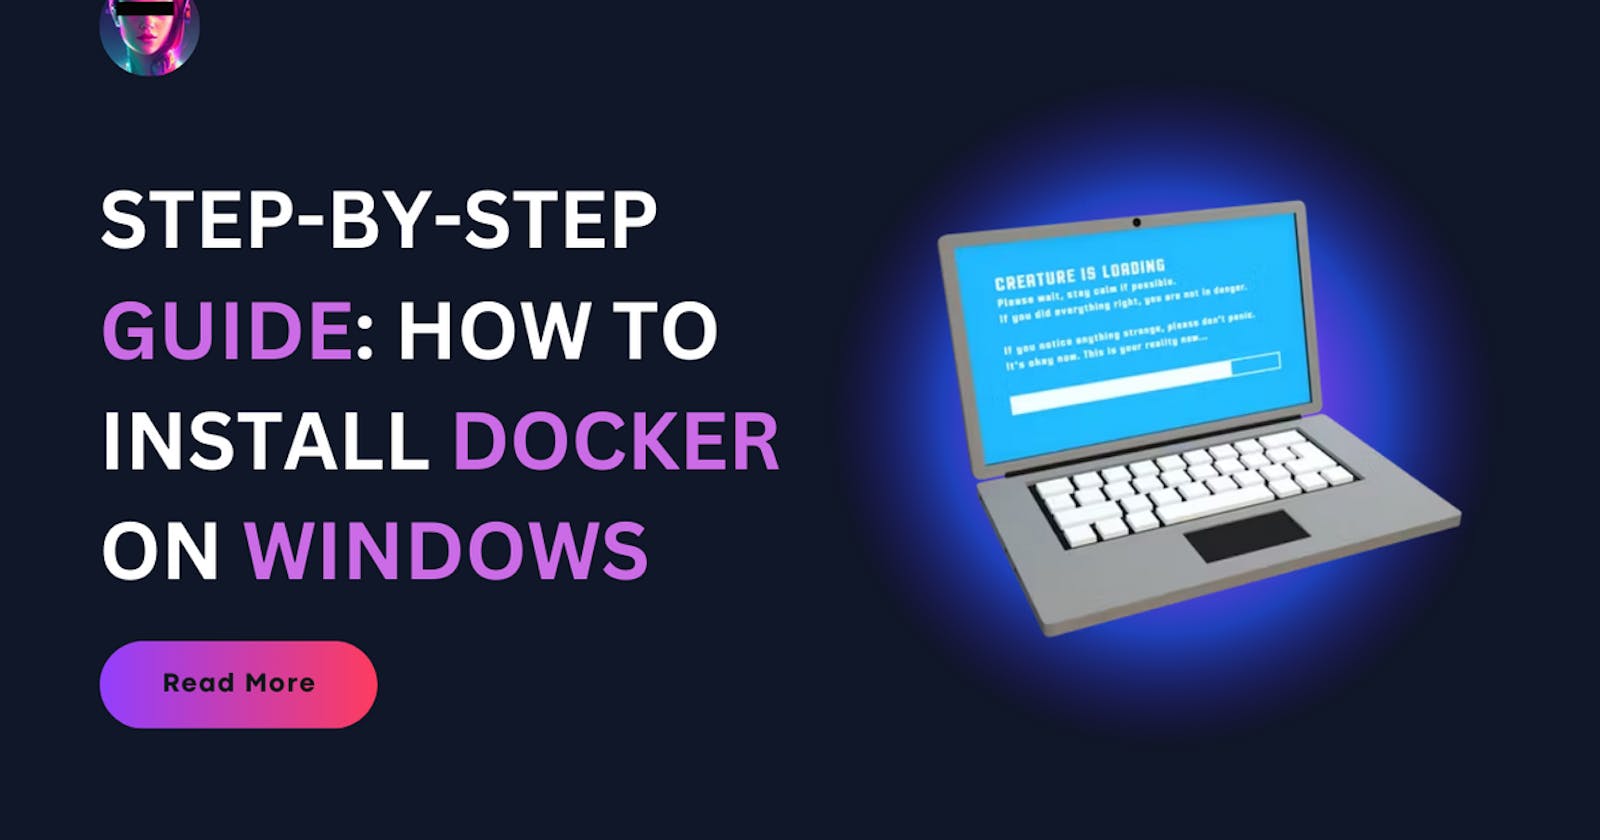 Step-by-Step Guide: How to Install Docker on Windows